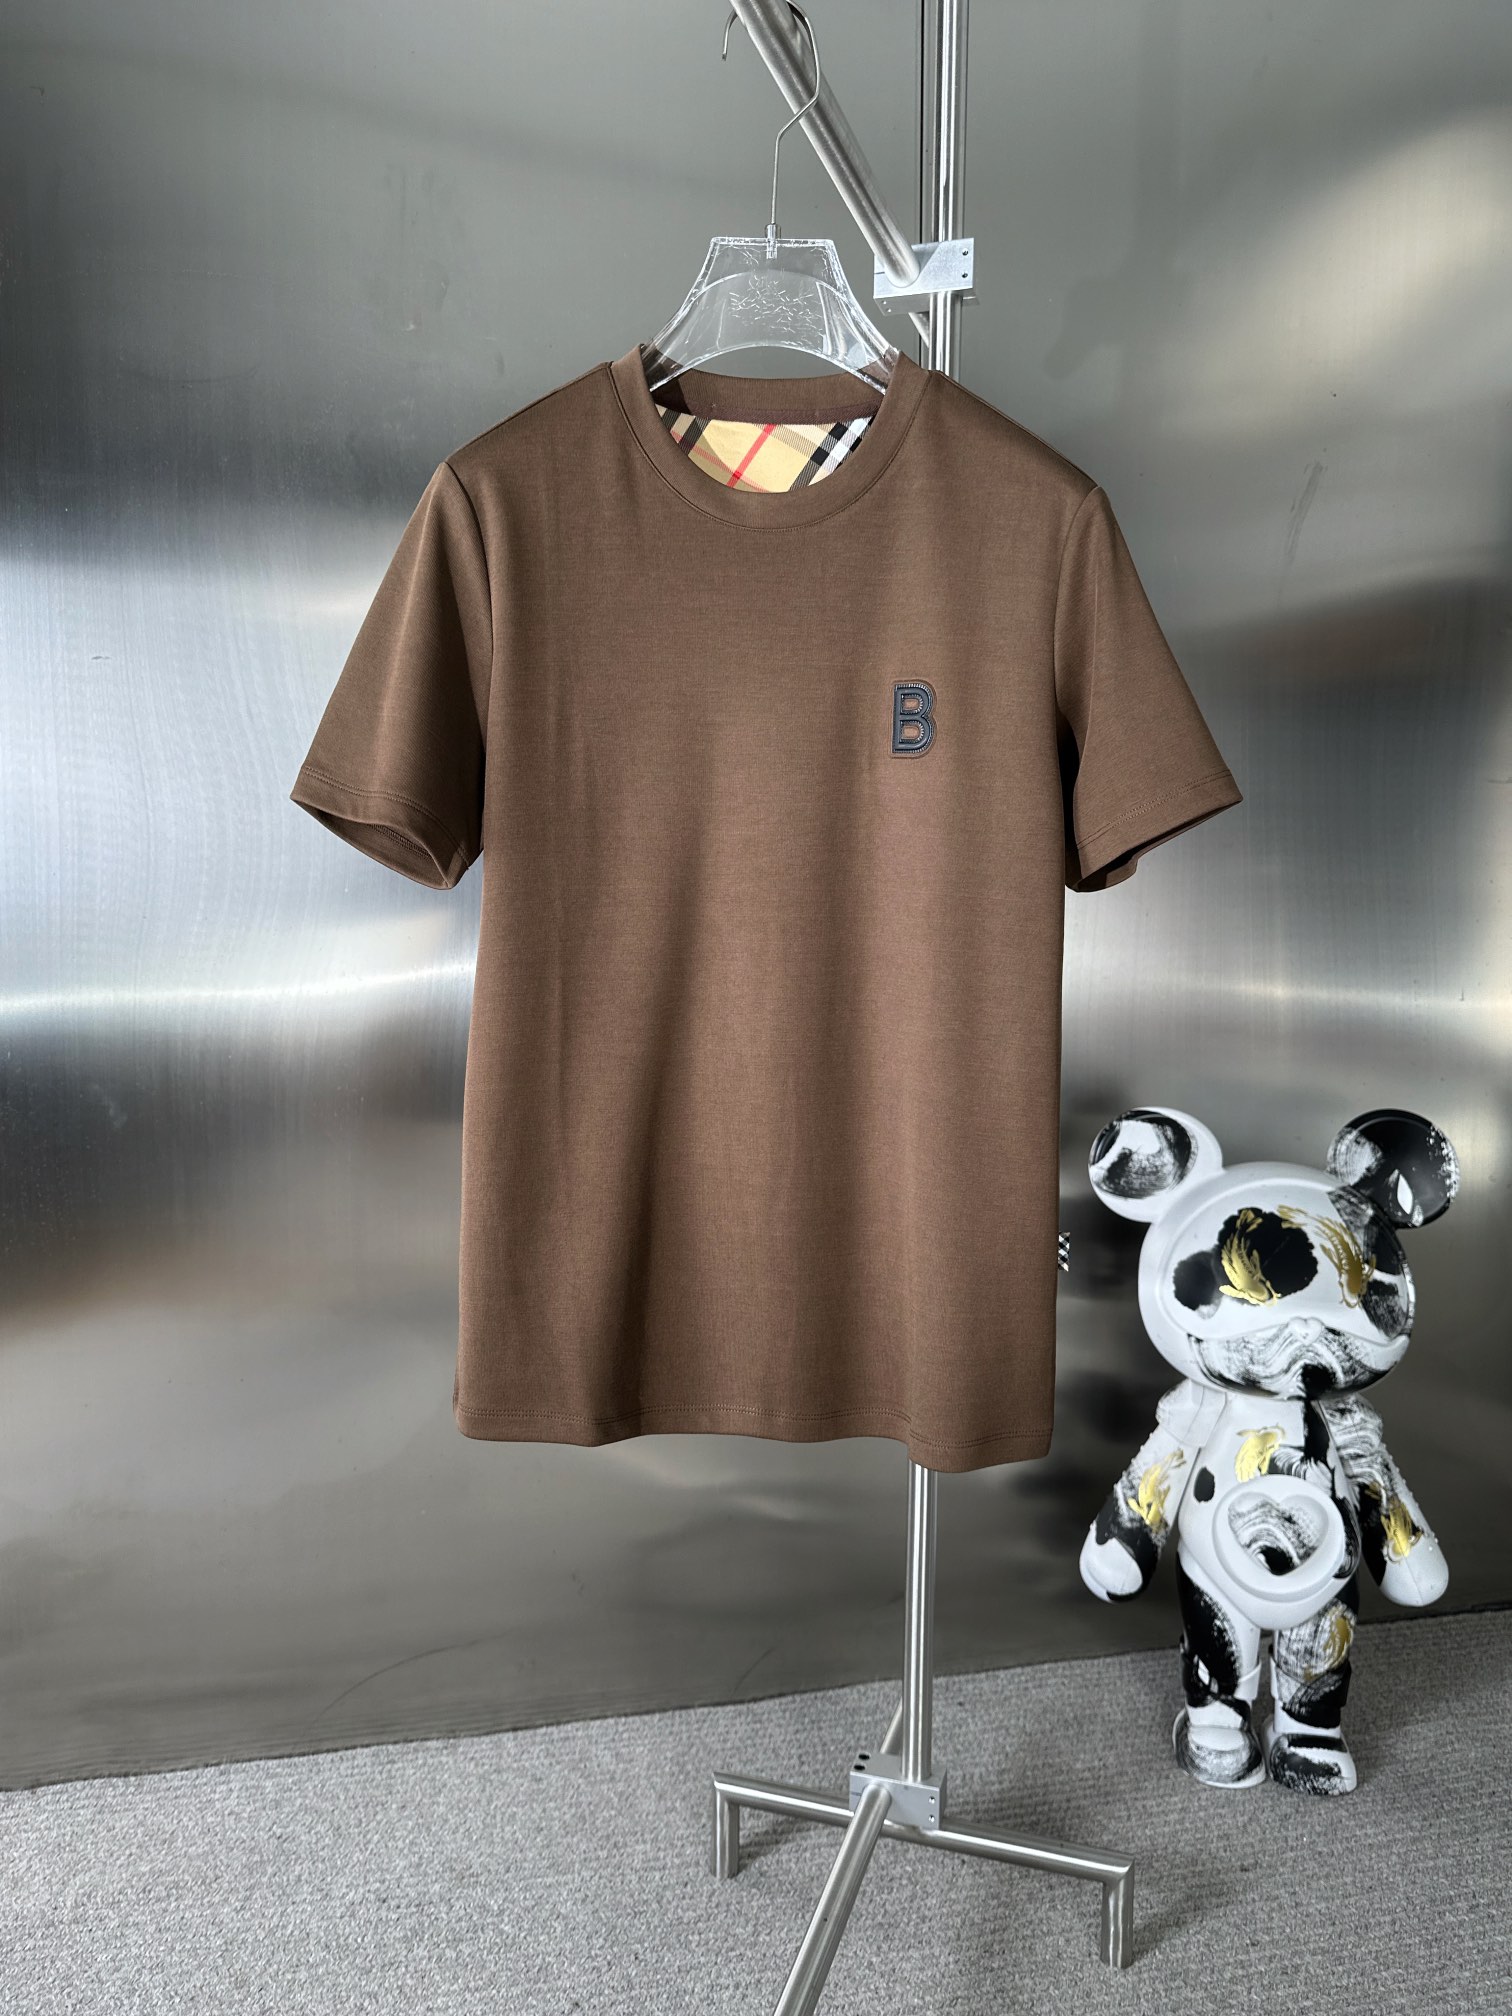 Burberry Copy
 Clothing T-Shirt Fall Collection Fashion Short Sleeve